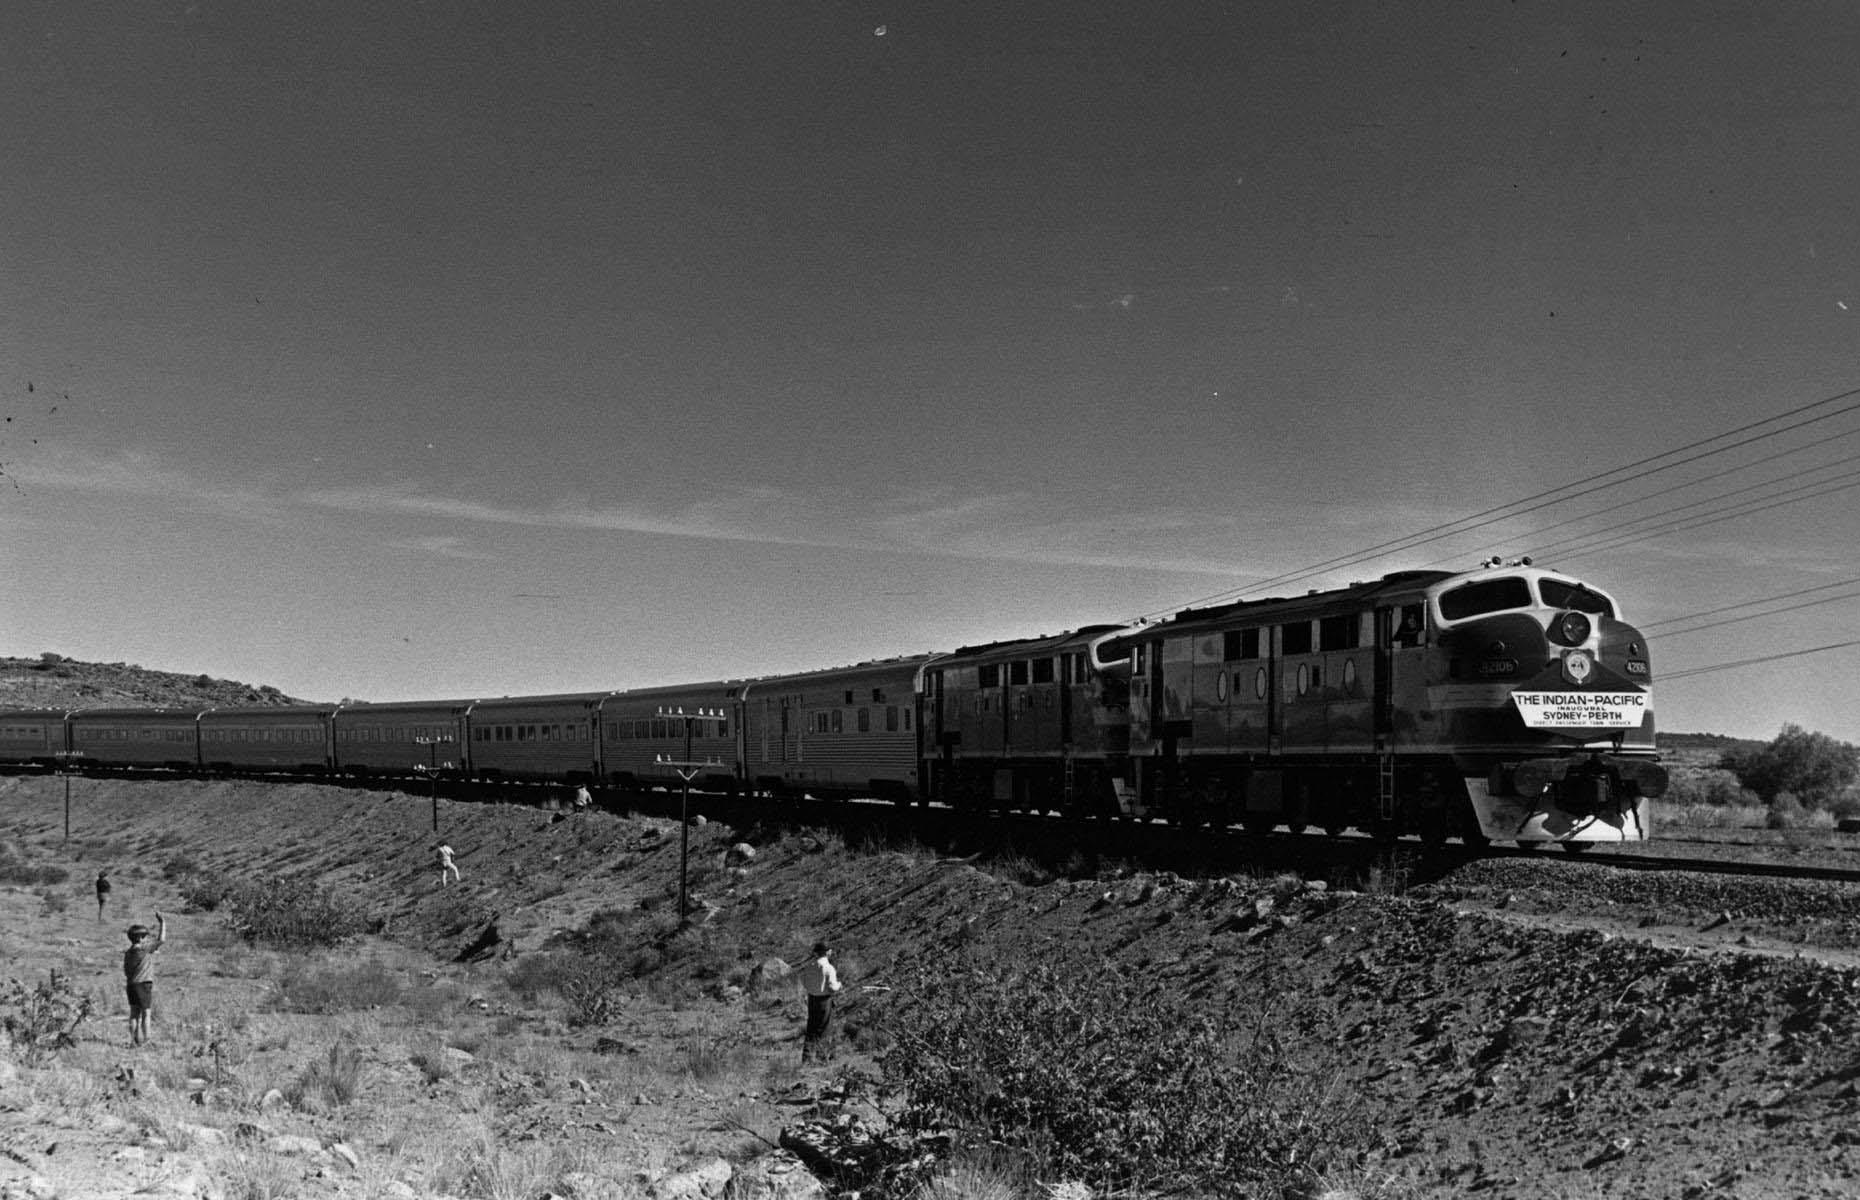 In contrast, it wasn't until 23 February 1970 when Australia's two coasts were finally linked by a direct rail service. More than 2,700 miles (4,345km) long, the journey between Perth in Western Australia and Sydney in New South Wales took around 75 hours to complete. Here, the new Indian Pacific (originally named The Transcontinental) is making its first journey in 1970.